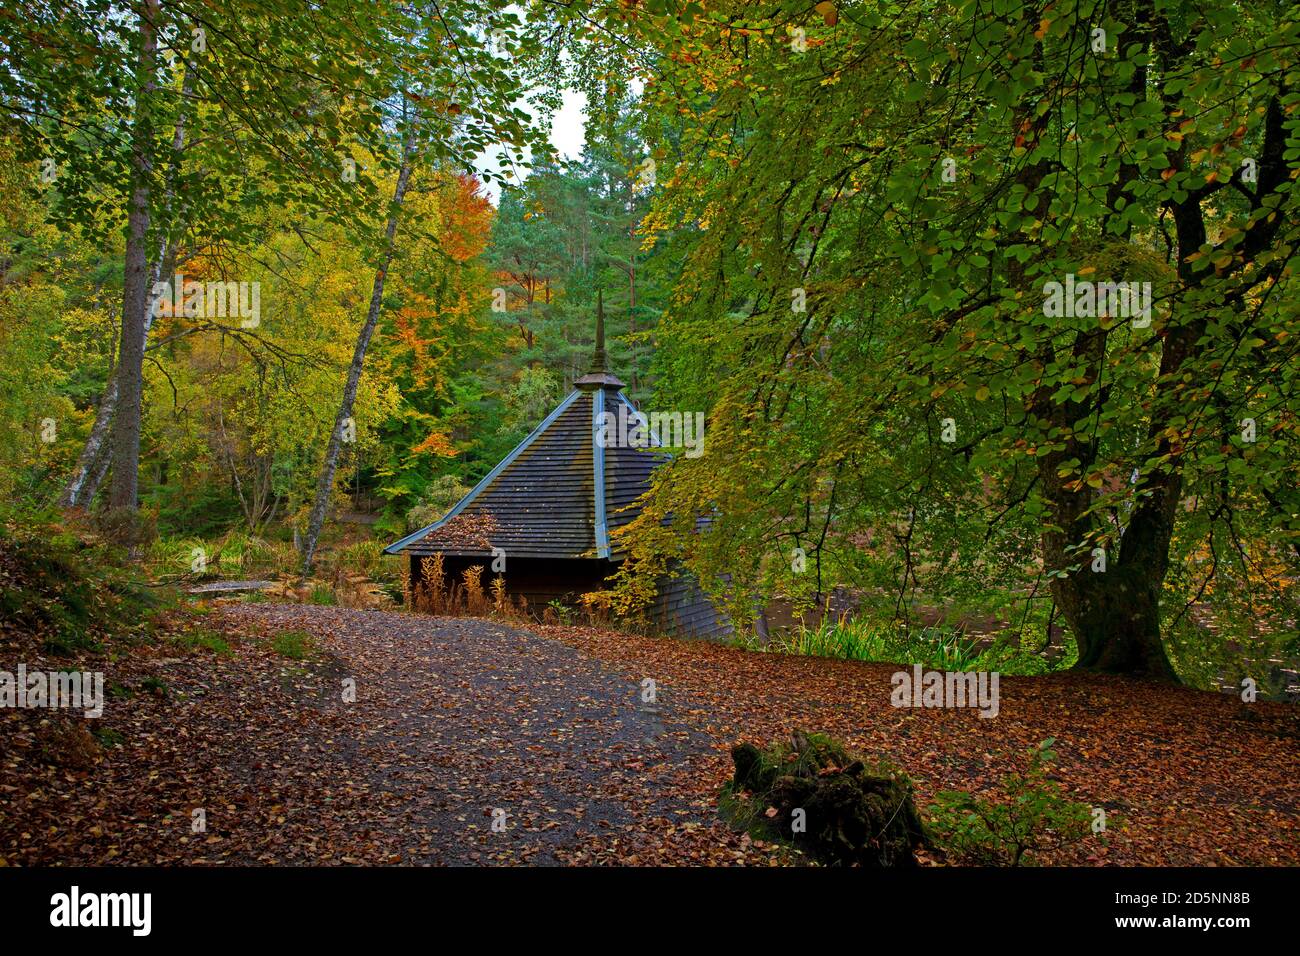 Perthshire, Scotland, UK, Loch Dunmore. 14 October  2020. Autumn foliage in Faskally Woods, and around the loch near Pitlochry, Scotland, UK. Stock Photo